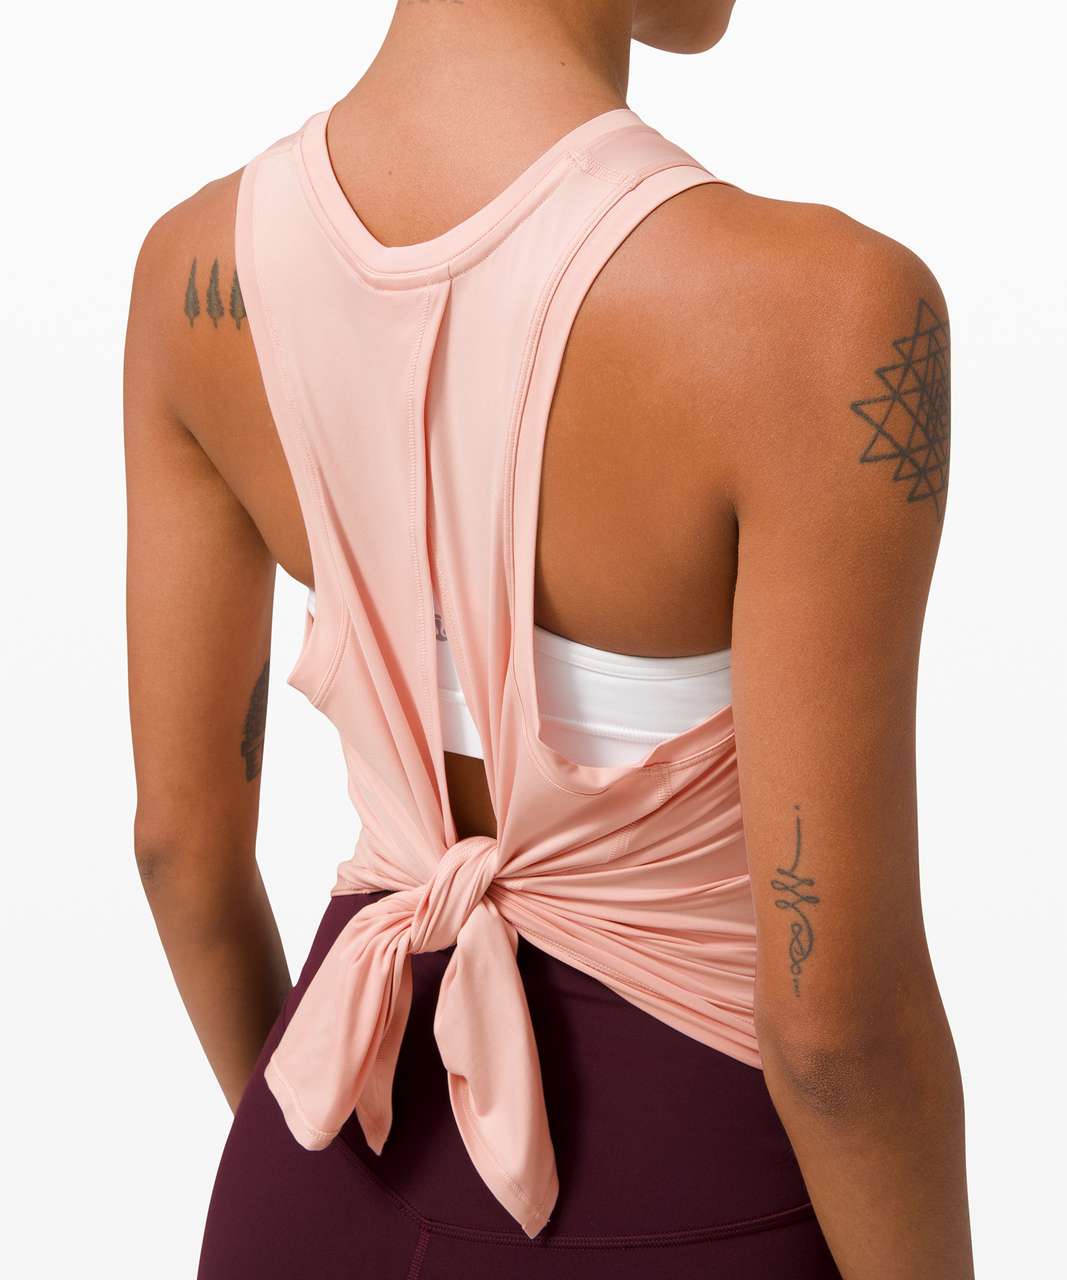 Lululemon All Tied Up Tank Top - Pink Mist (First Release)